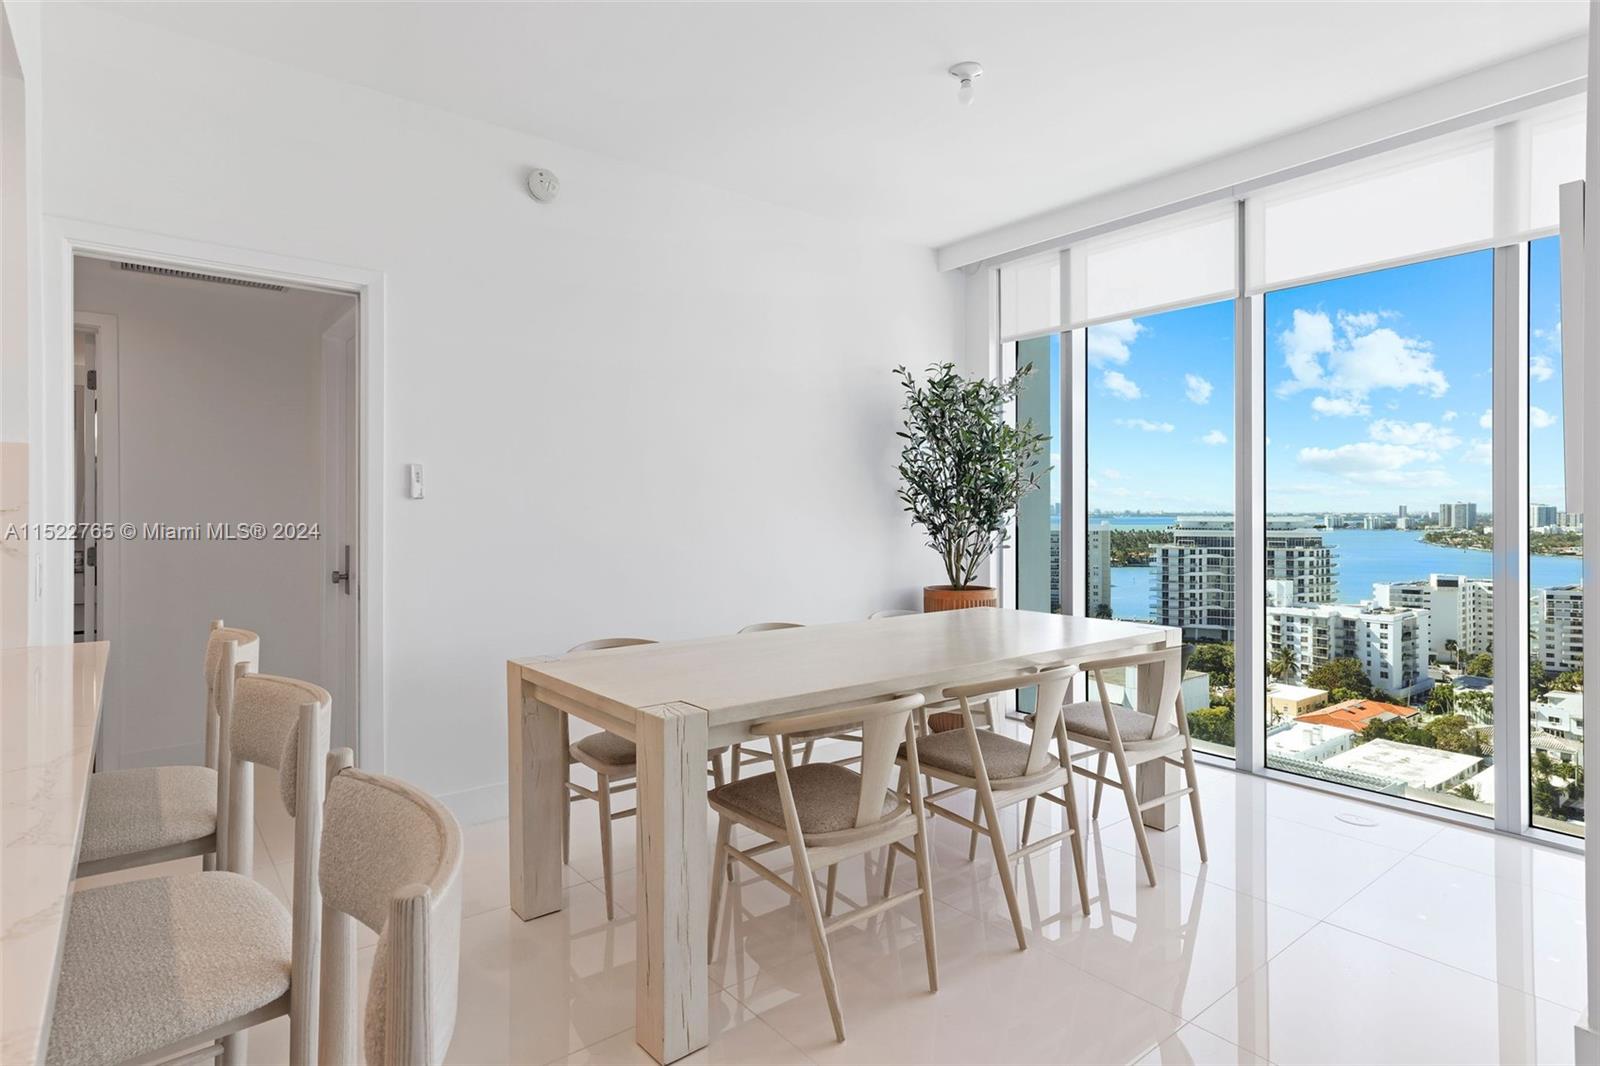 This renovated high floor condo offers breathtaking views of the sunset and inter-coastal at the Carillon Miami Beach in Florida. The updated kitchen boasts modern amenities, ensuring that you have everything you need to prepare a delicious meal or entertain guests. The split bedroom floor plan allows for privacy and comfort, making it the ideal choice for families, couples, or anyone who appreciates the finer things in life. Experience the best of Miami Beach living at the Carillon, where you can enjoy endless sun, sand, and sea, as well as easy access to the wide range of amenities including a 70,000 square foot spa, fitness center, and multiple dining options. Available mid March for summer season until October/Nov ONLY Please use virtual tour